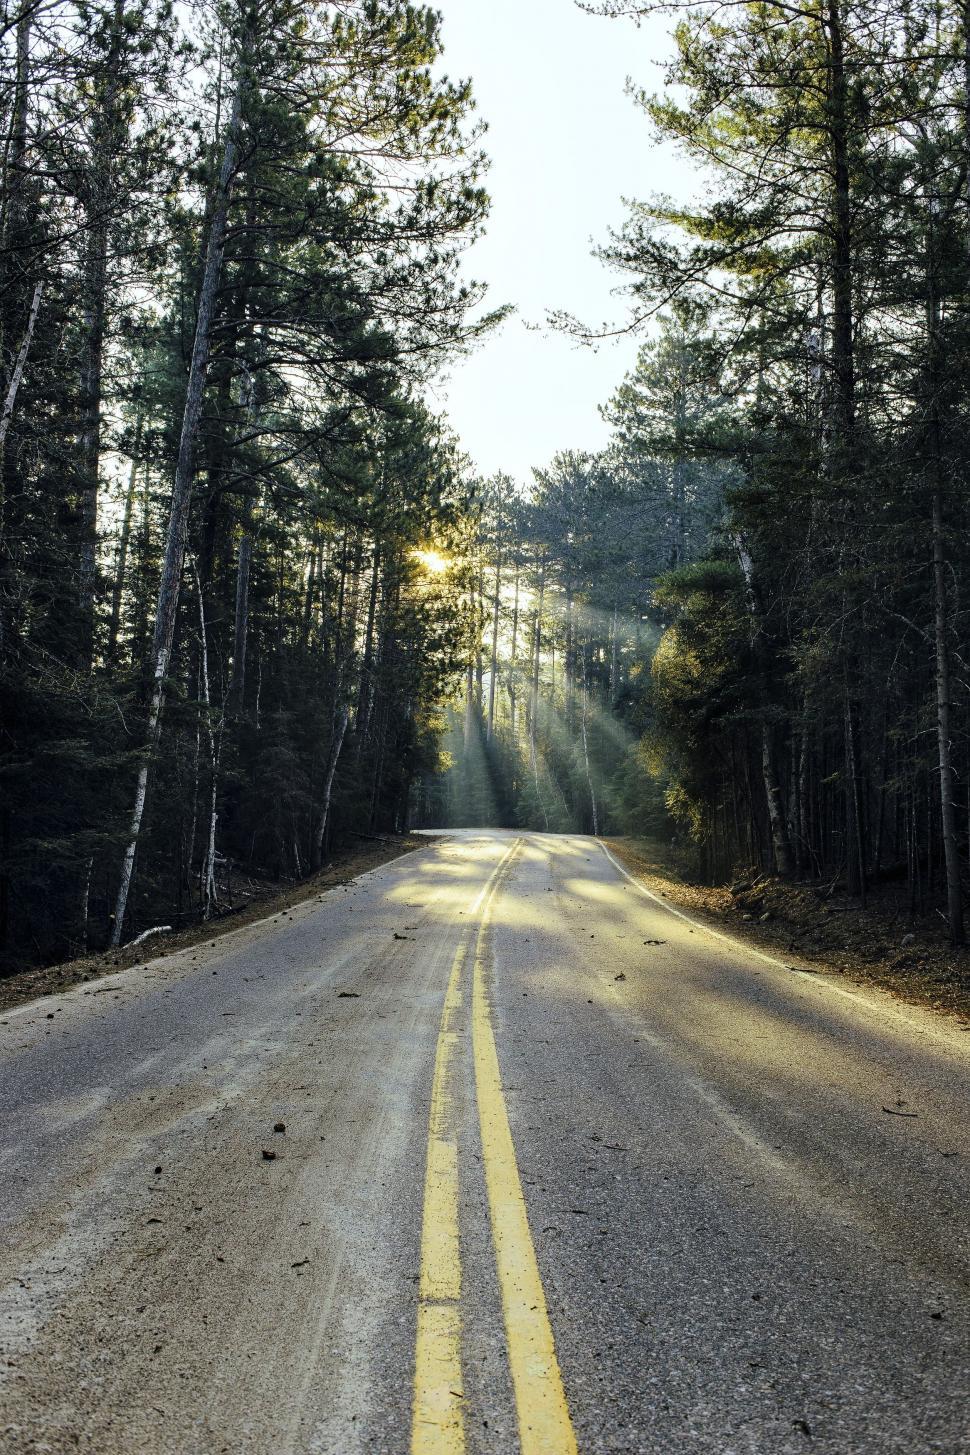 Free Image of Road in Forest  